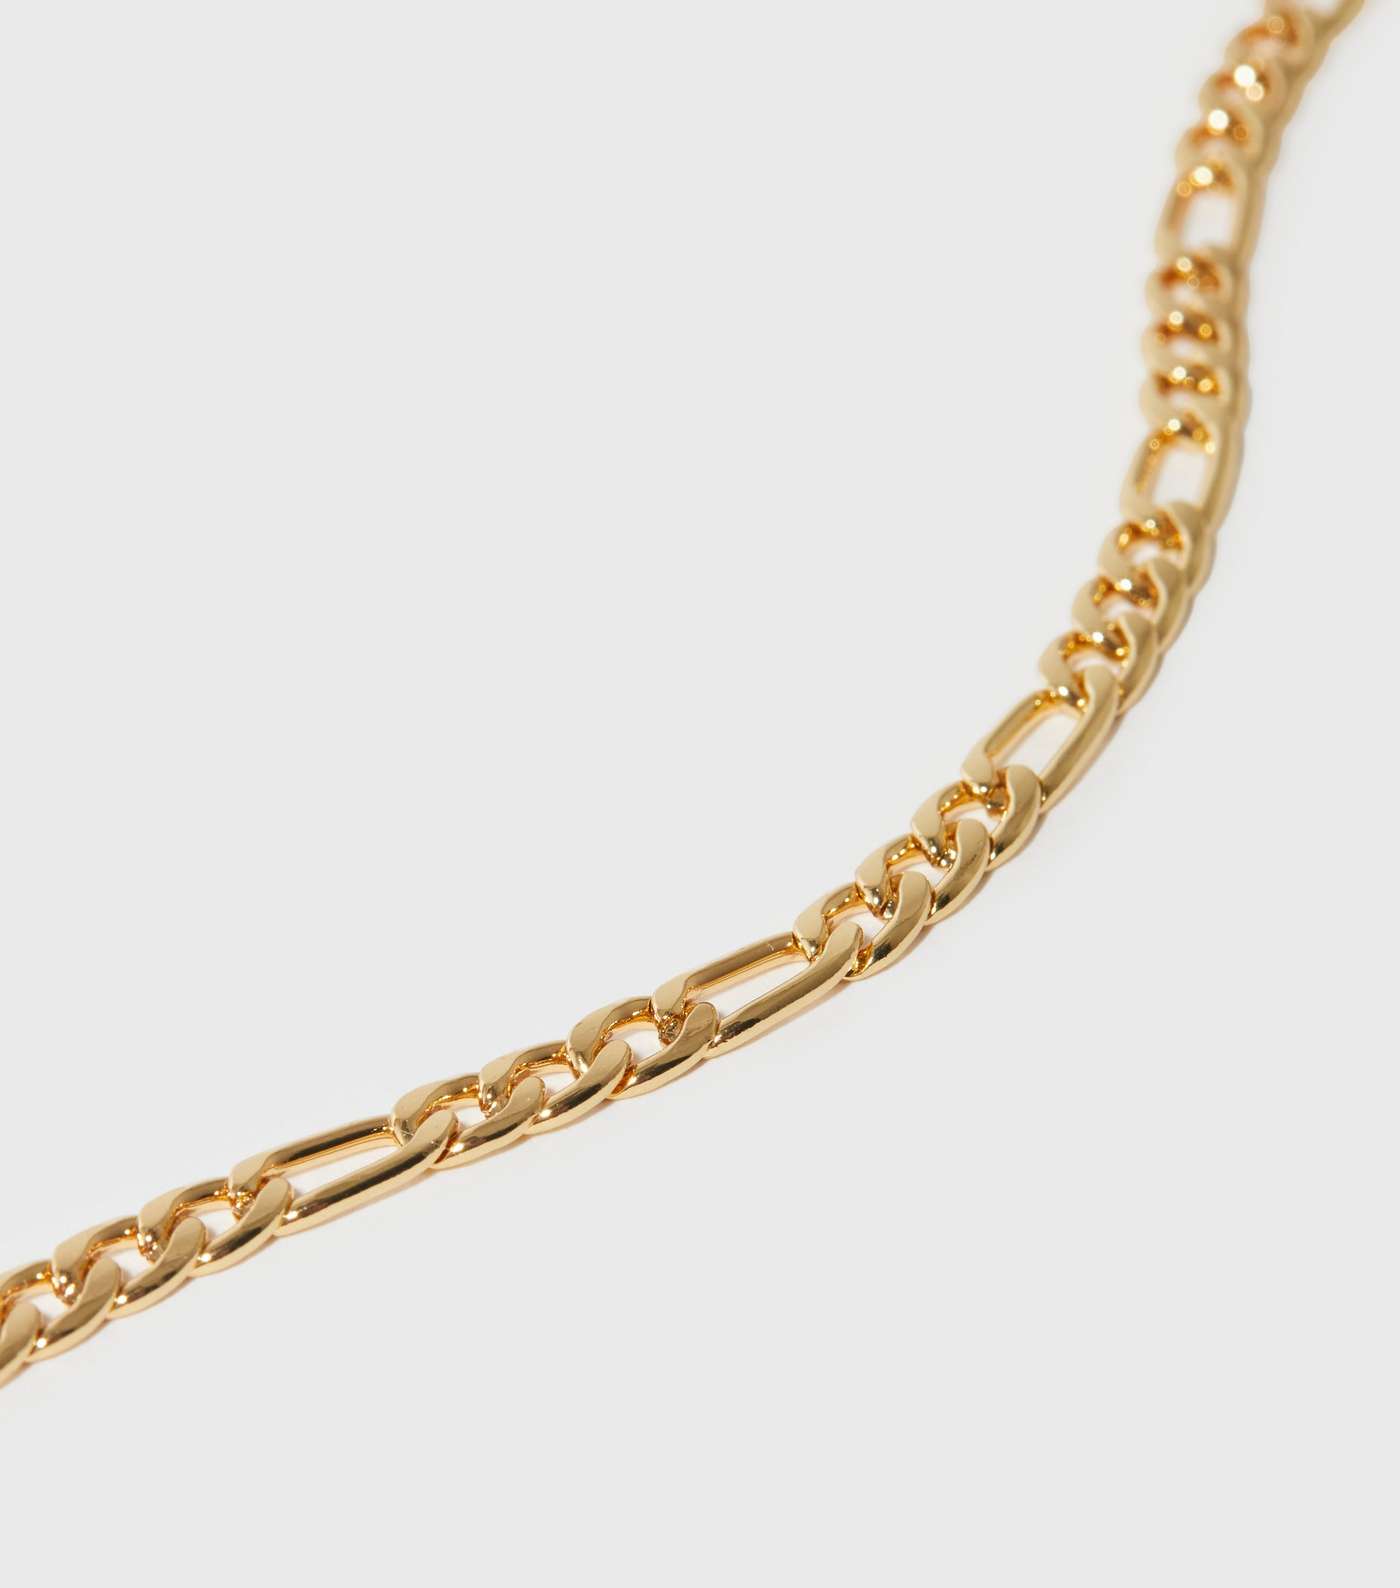 Real Gold Plate Chain Link Necklace Image 2